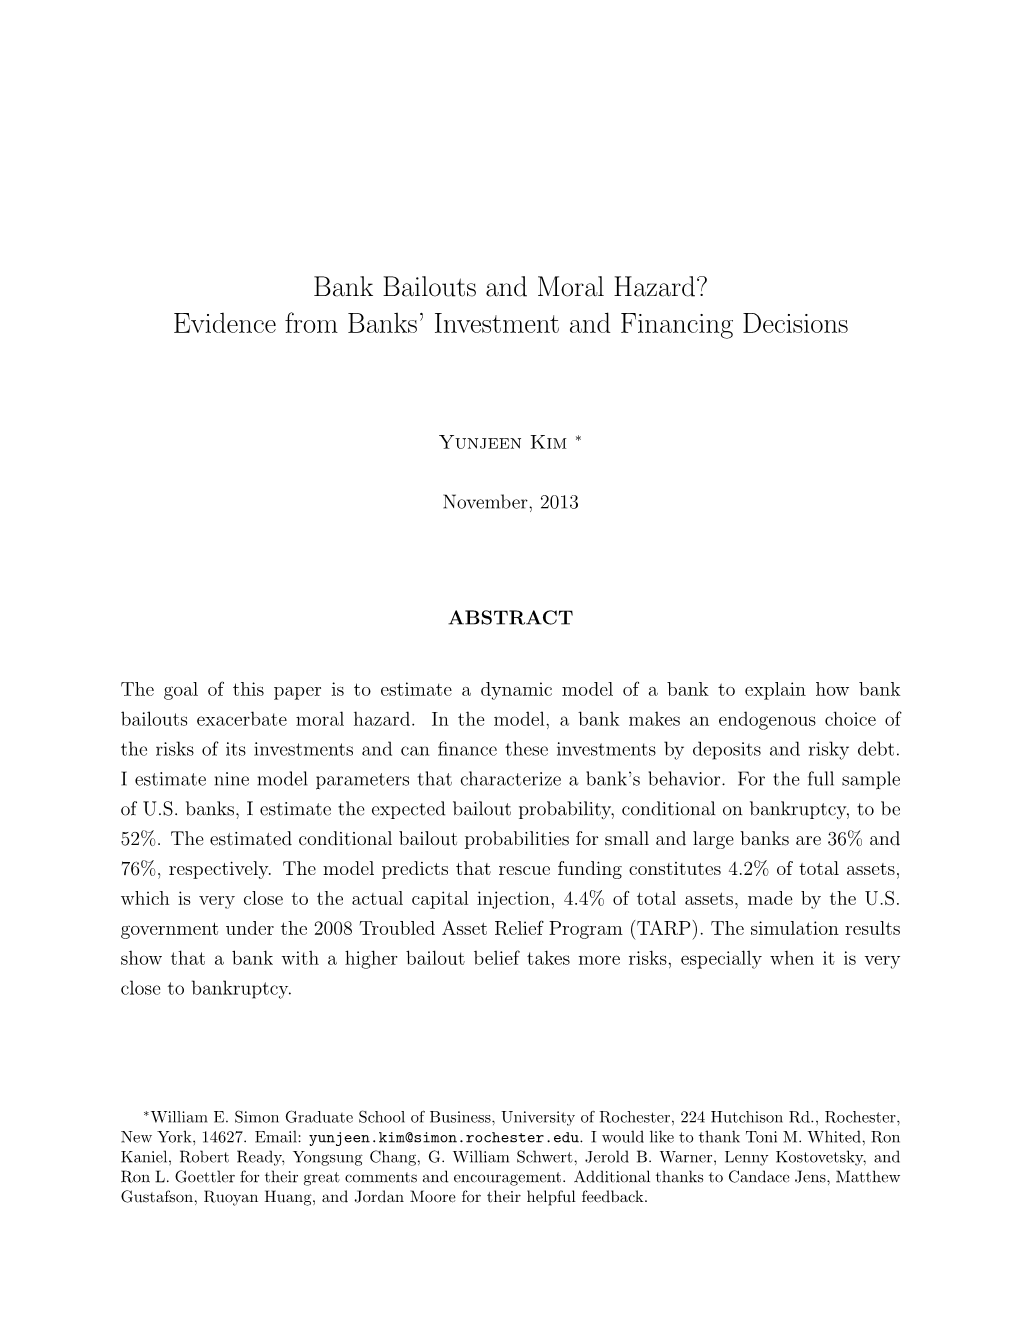 Bank Bailouts and Moral Hazard? Evidence from Banks' Investment